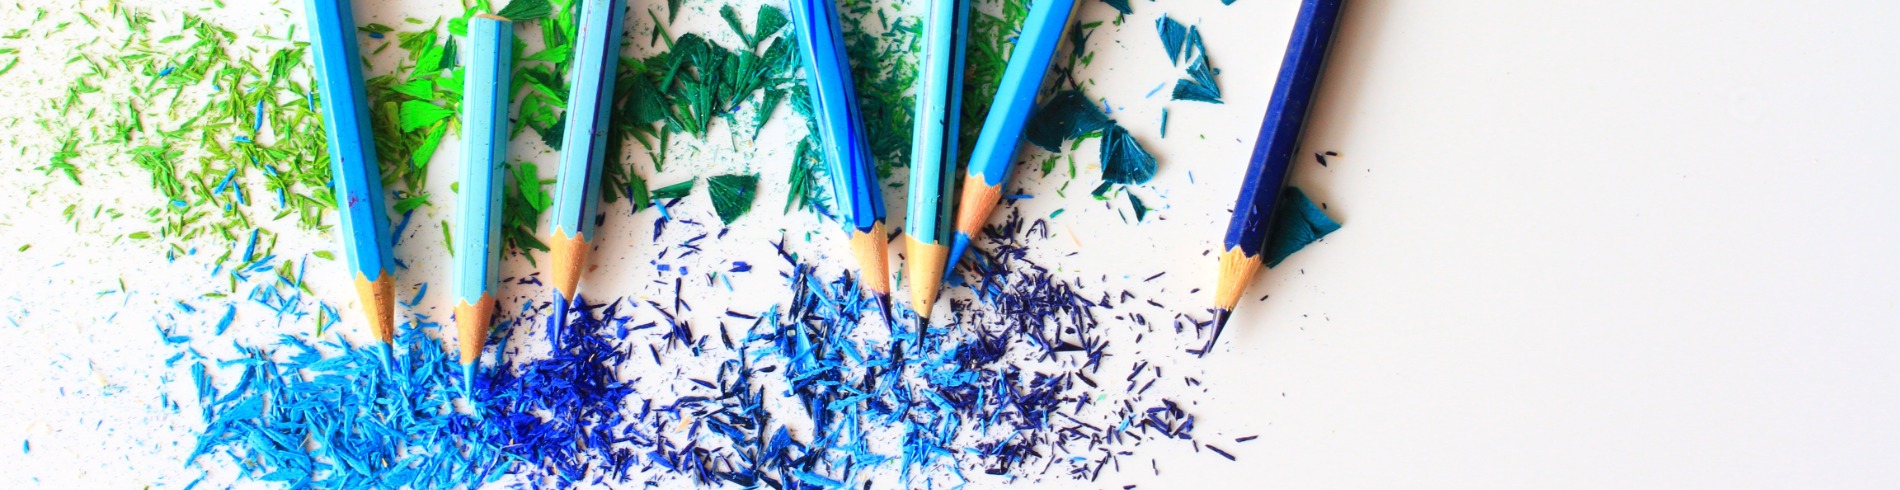 Blue and green pencil crayons and shavings